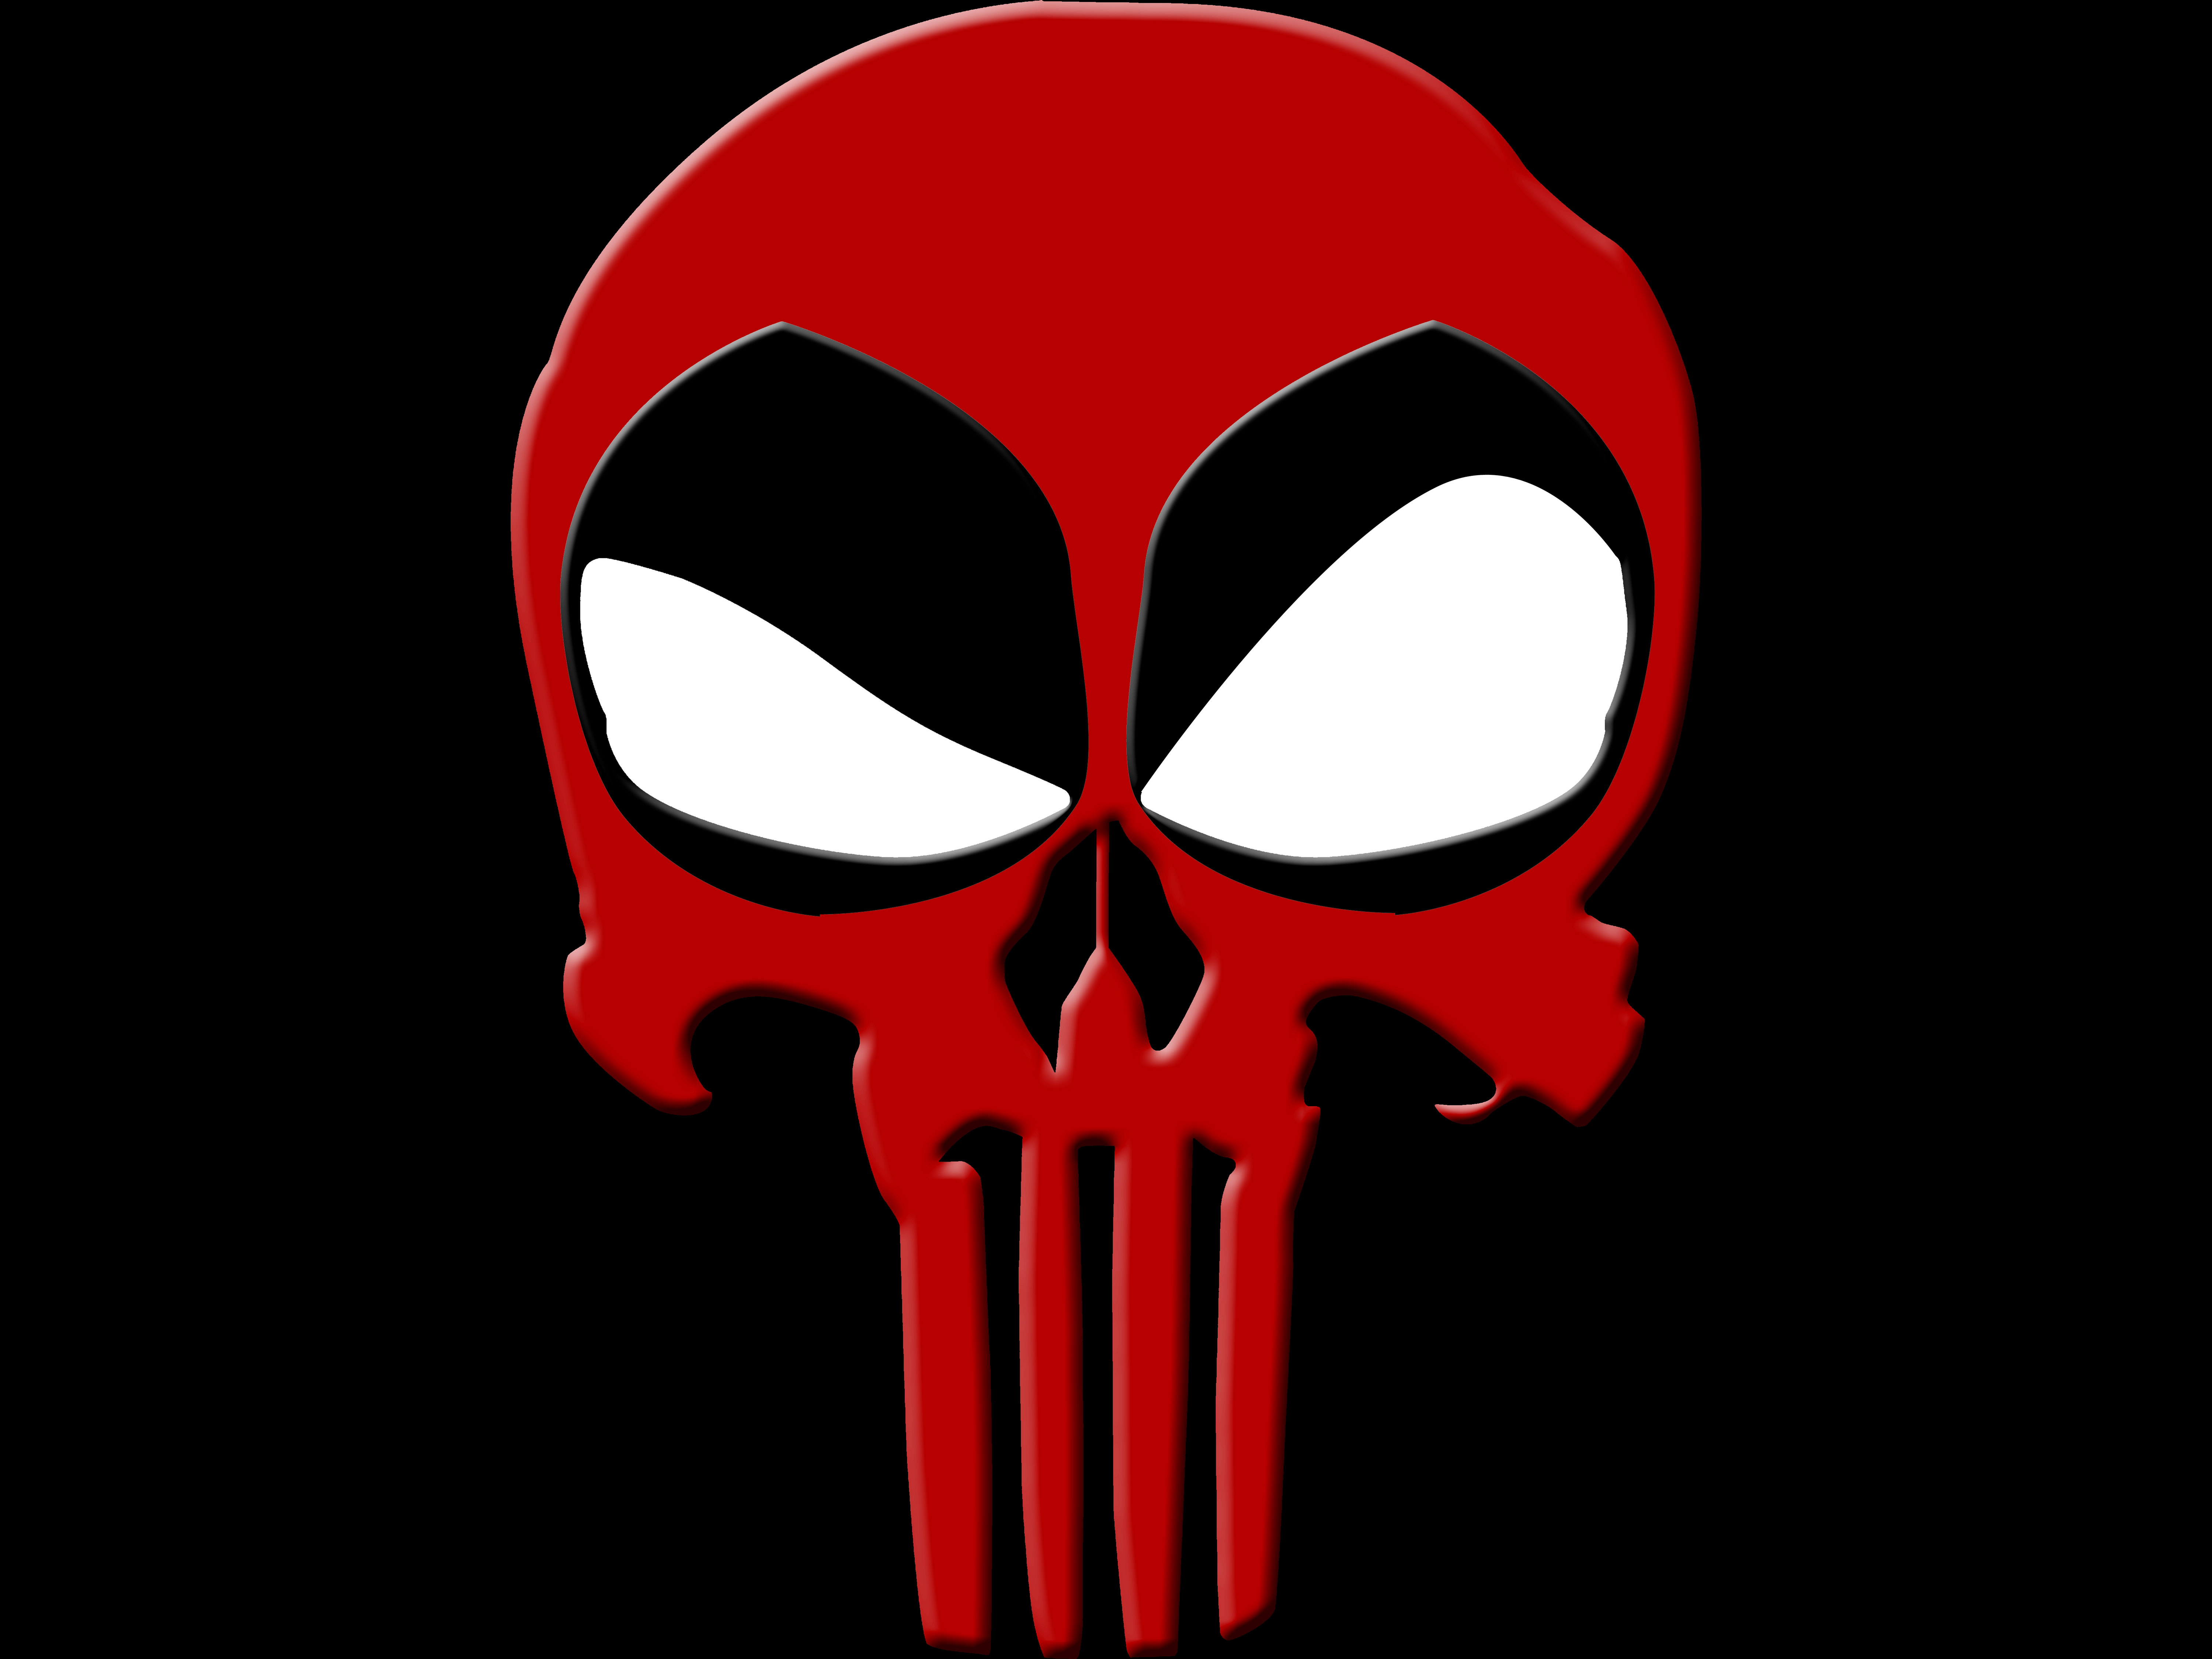 comics, deadpool, merc with a mouth, punisher wallpaper for mobile